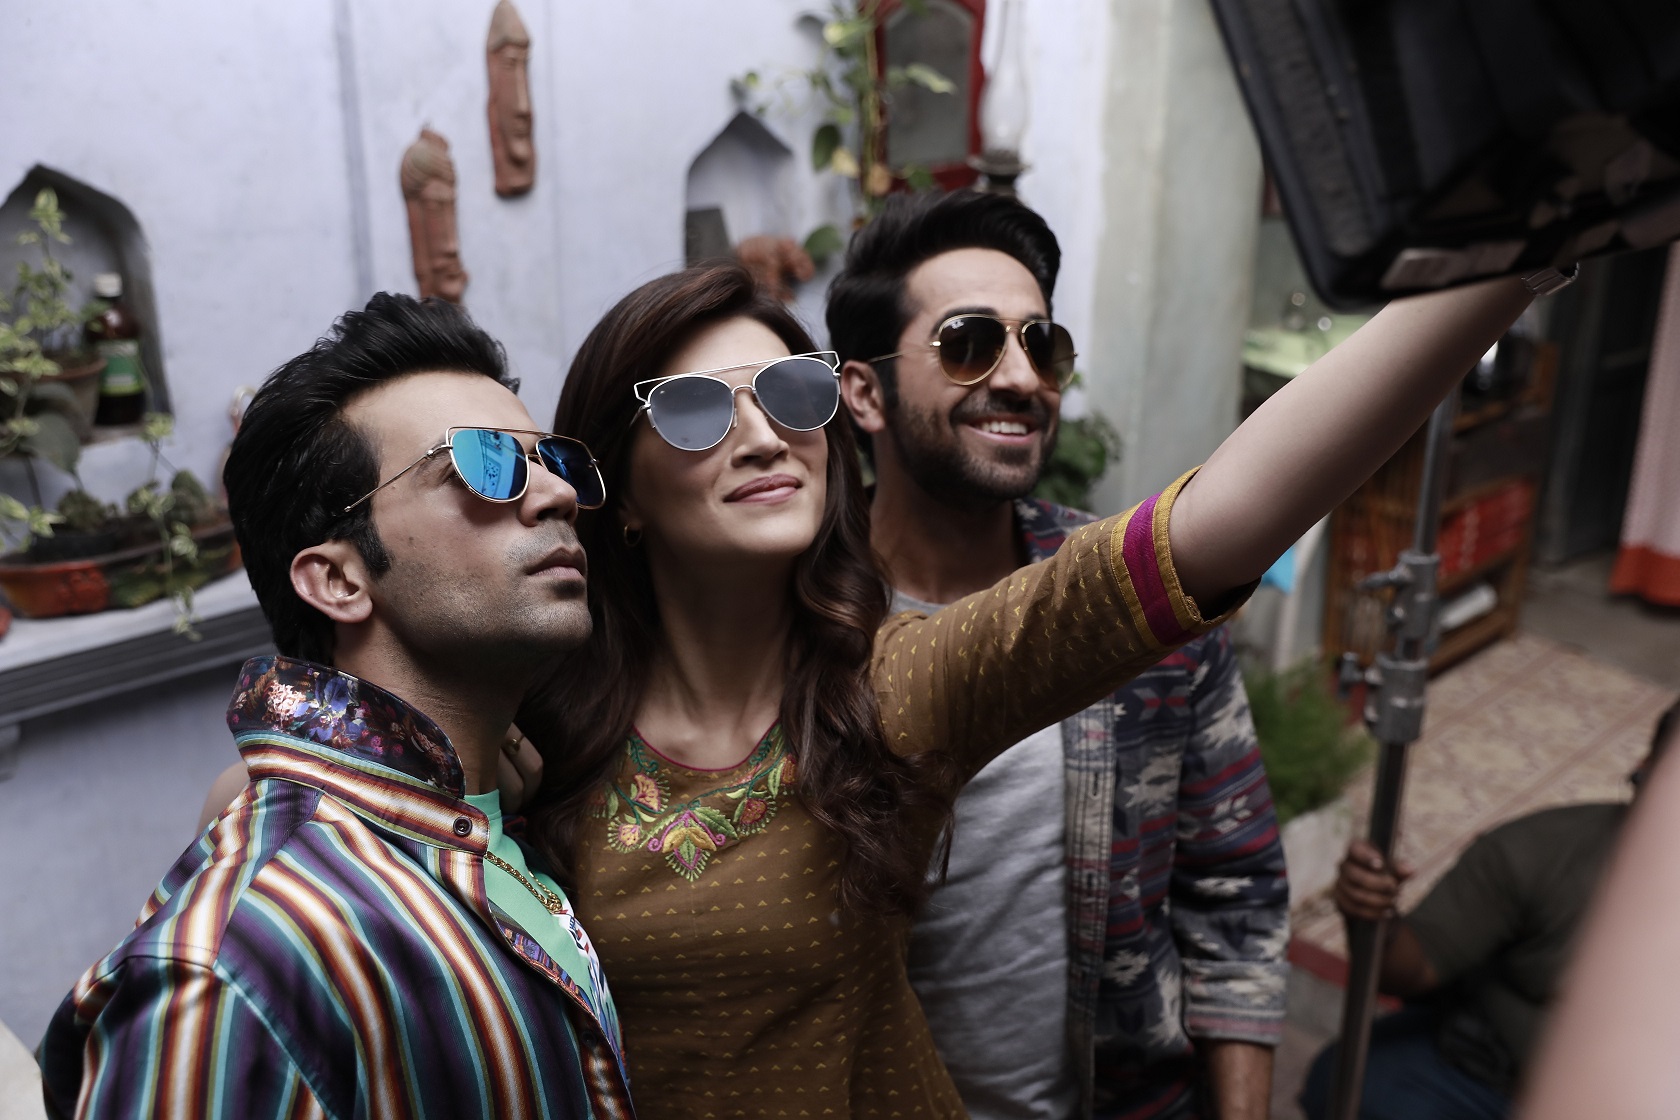 Bareilly Ki Barfi’s trailer sets out to be the most loved one of the year